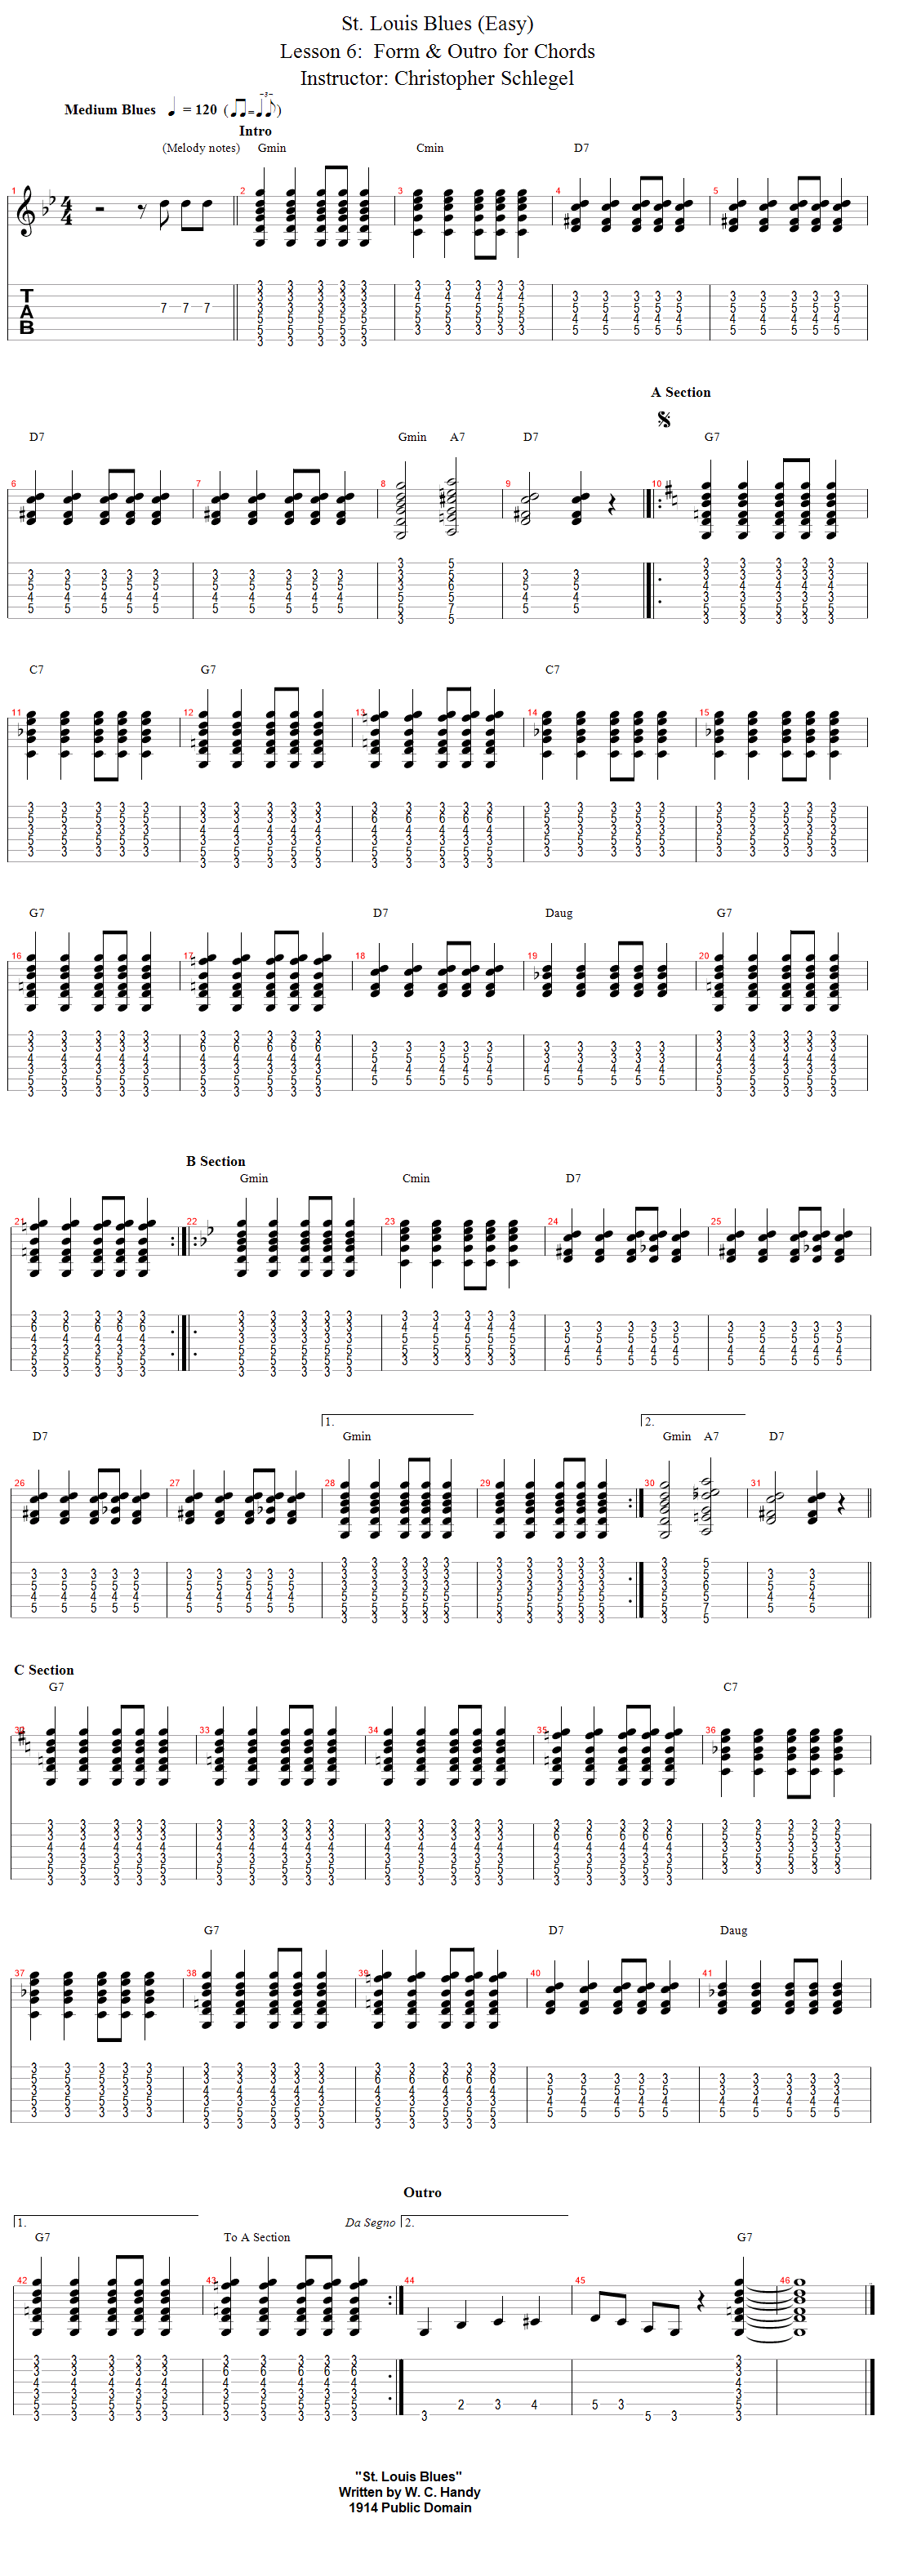 Guitar Lessons: Overall Form For Chords